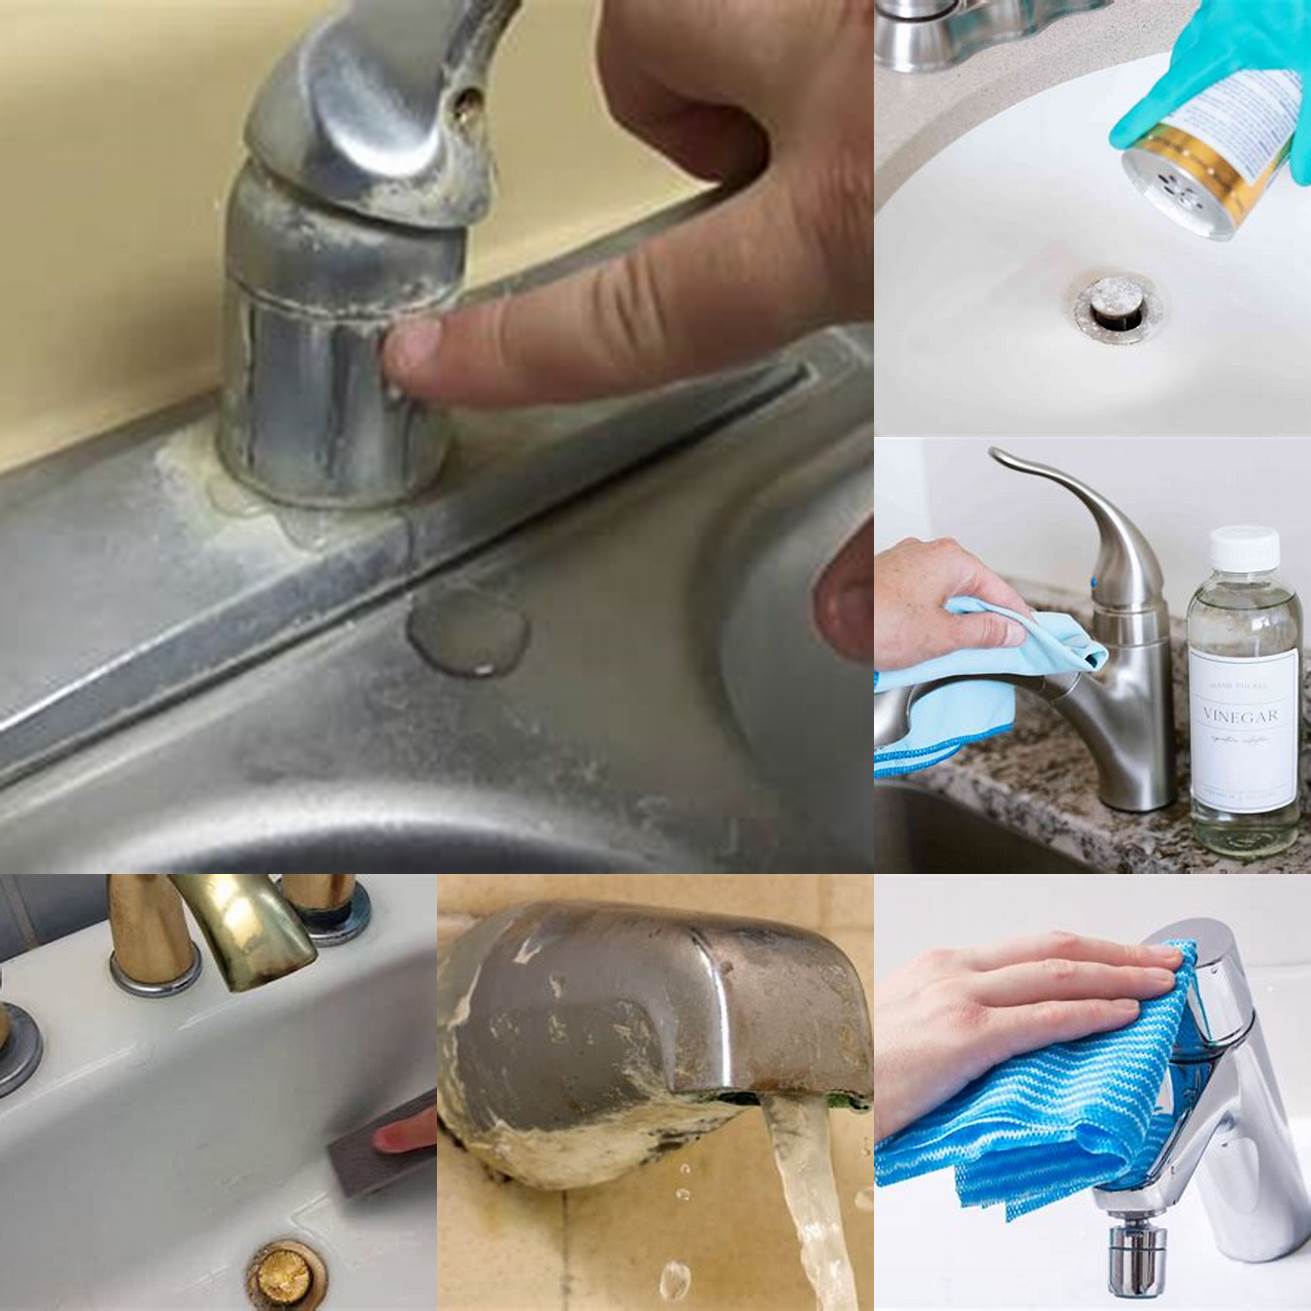 Keep the sink and faucet dry to prevent water stains and mineral buildup Use a squeegee or towel to wipe them after use